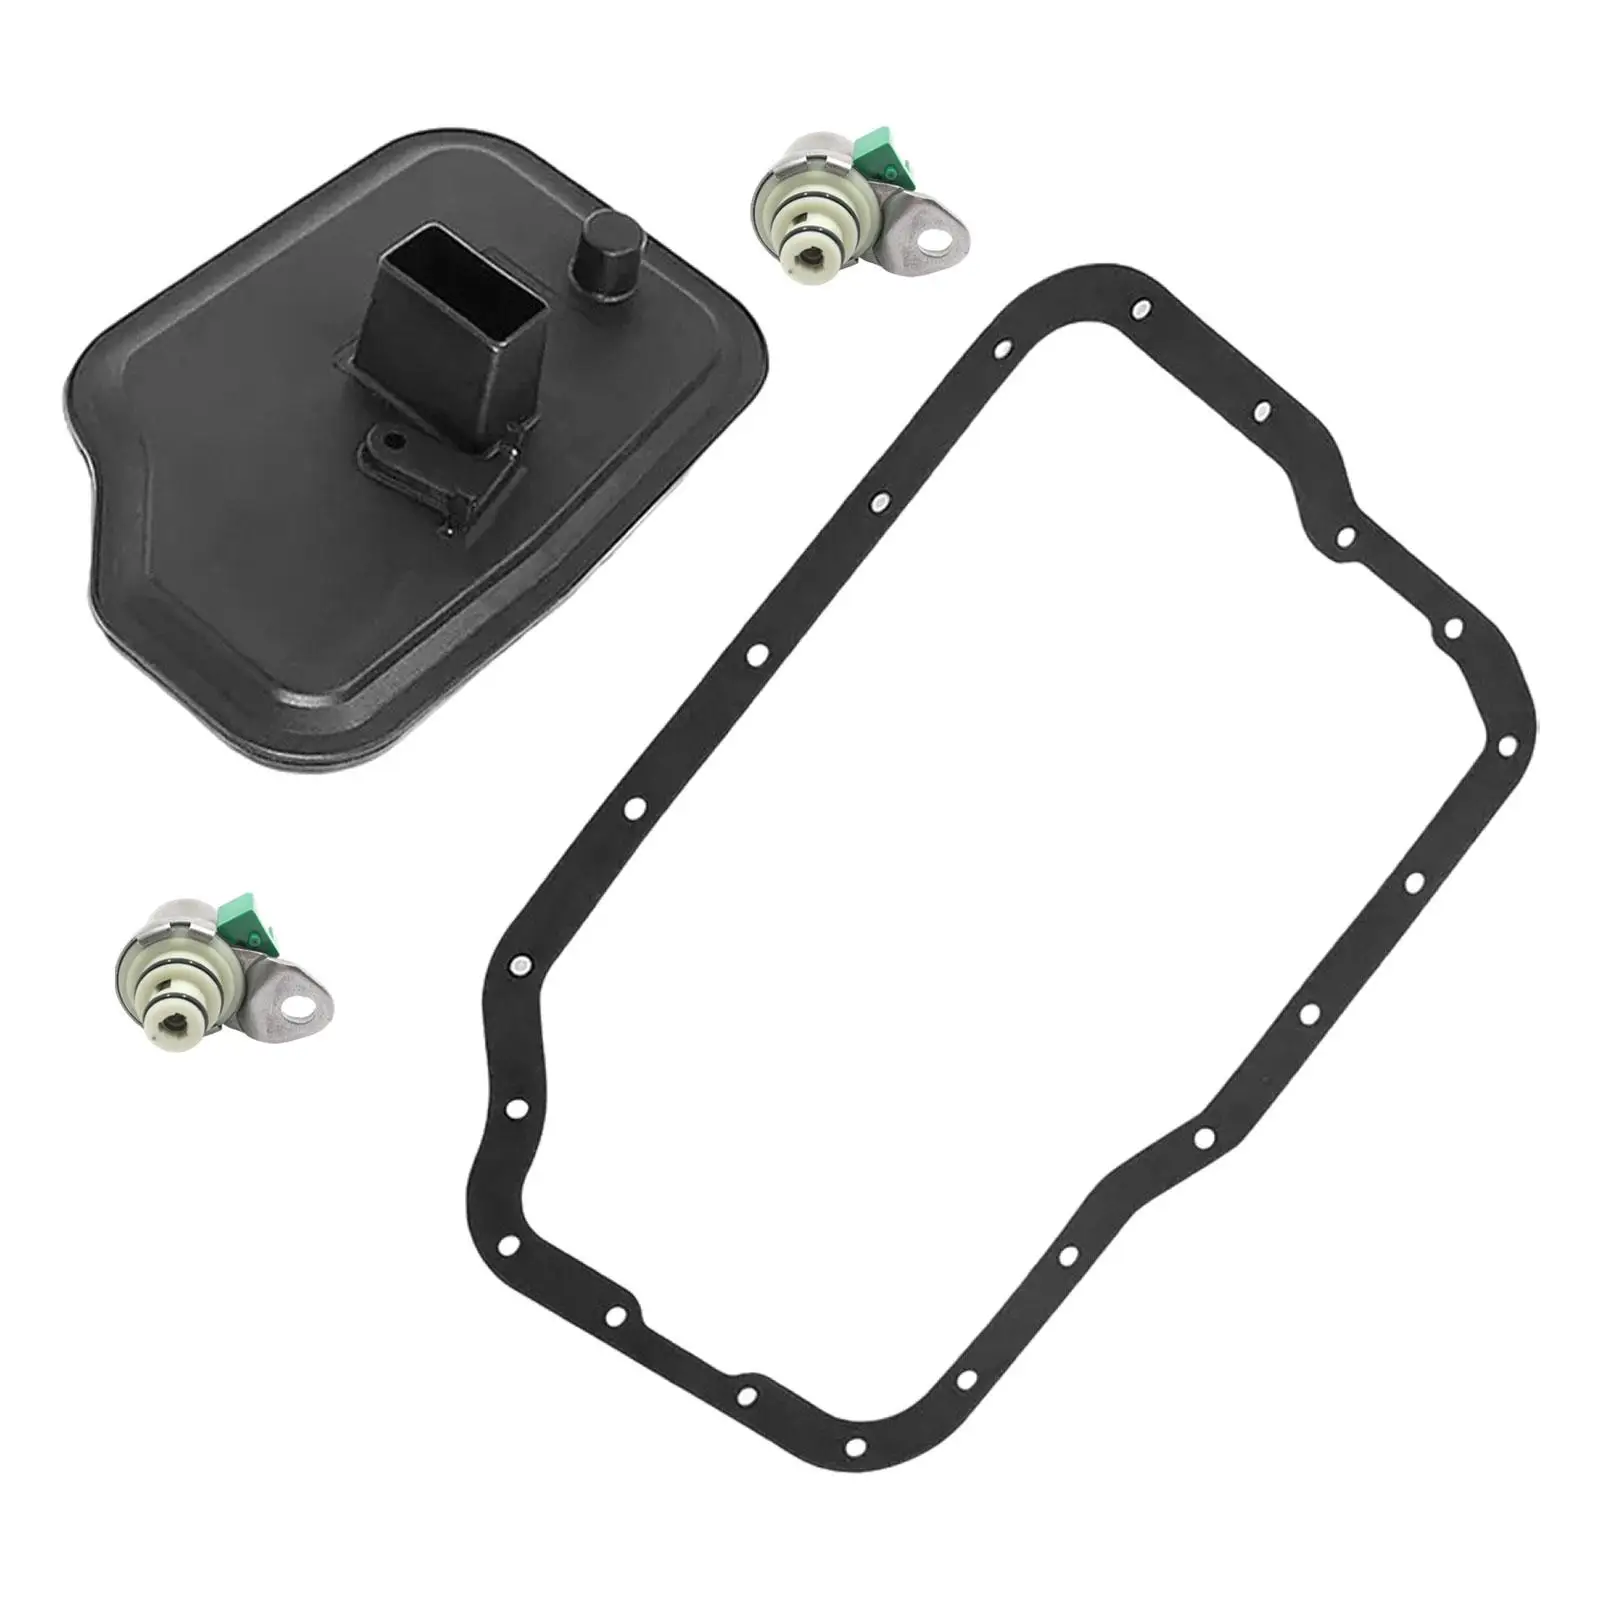 Transmission Filter Pan Gasket Kit Accessory for Ford Mazda Replacement